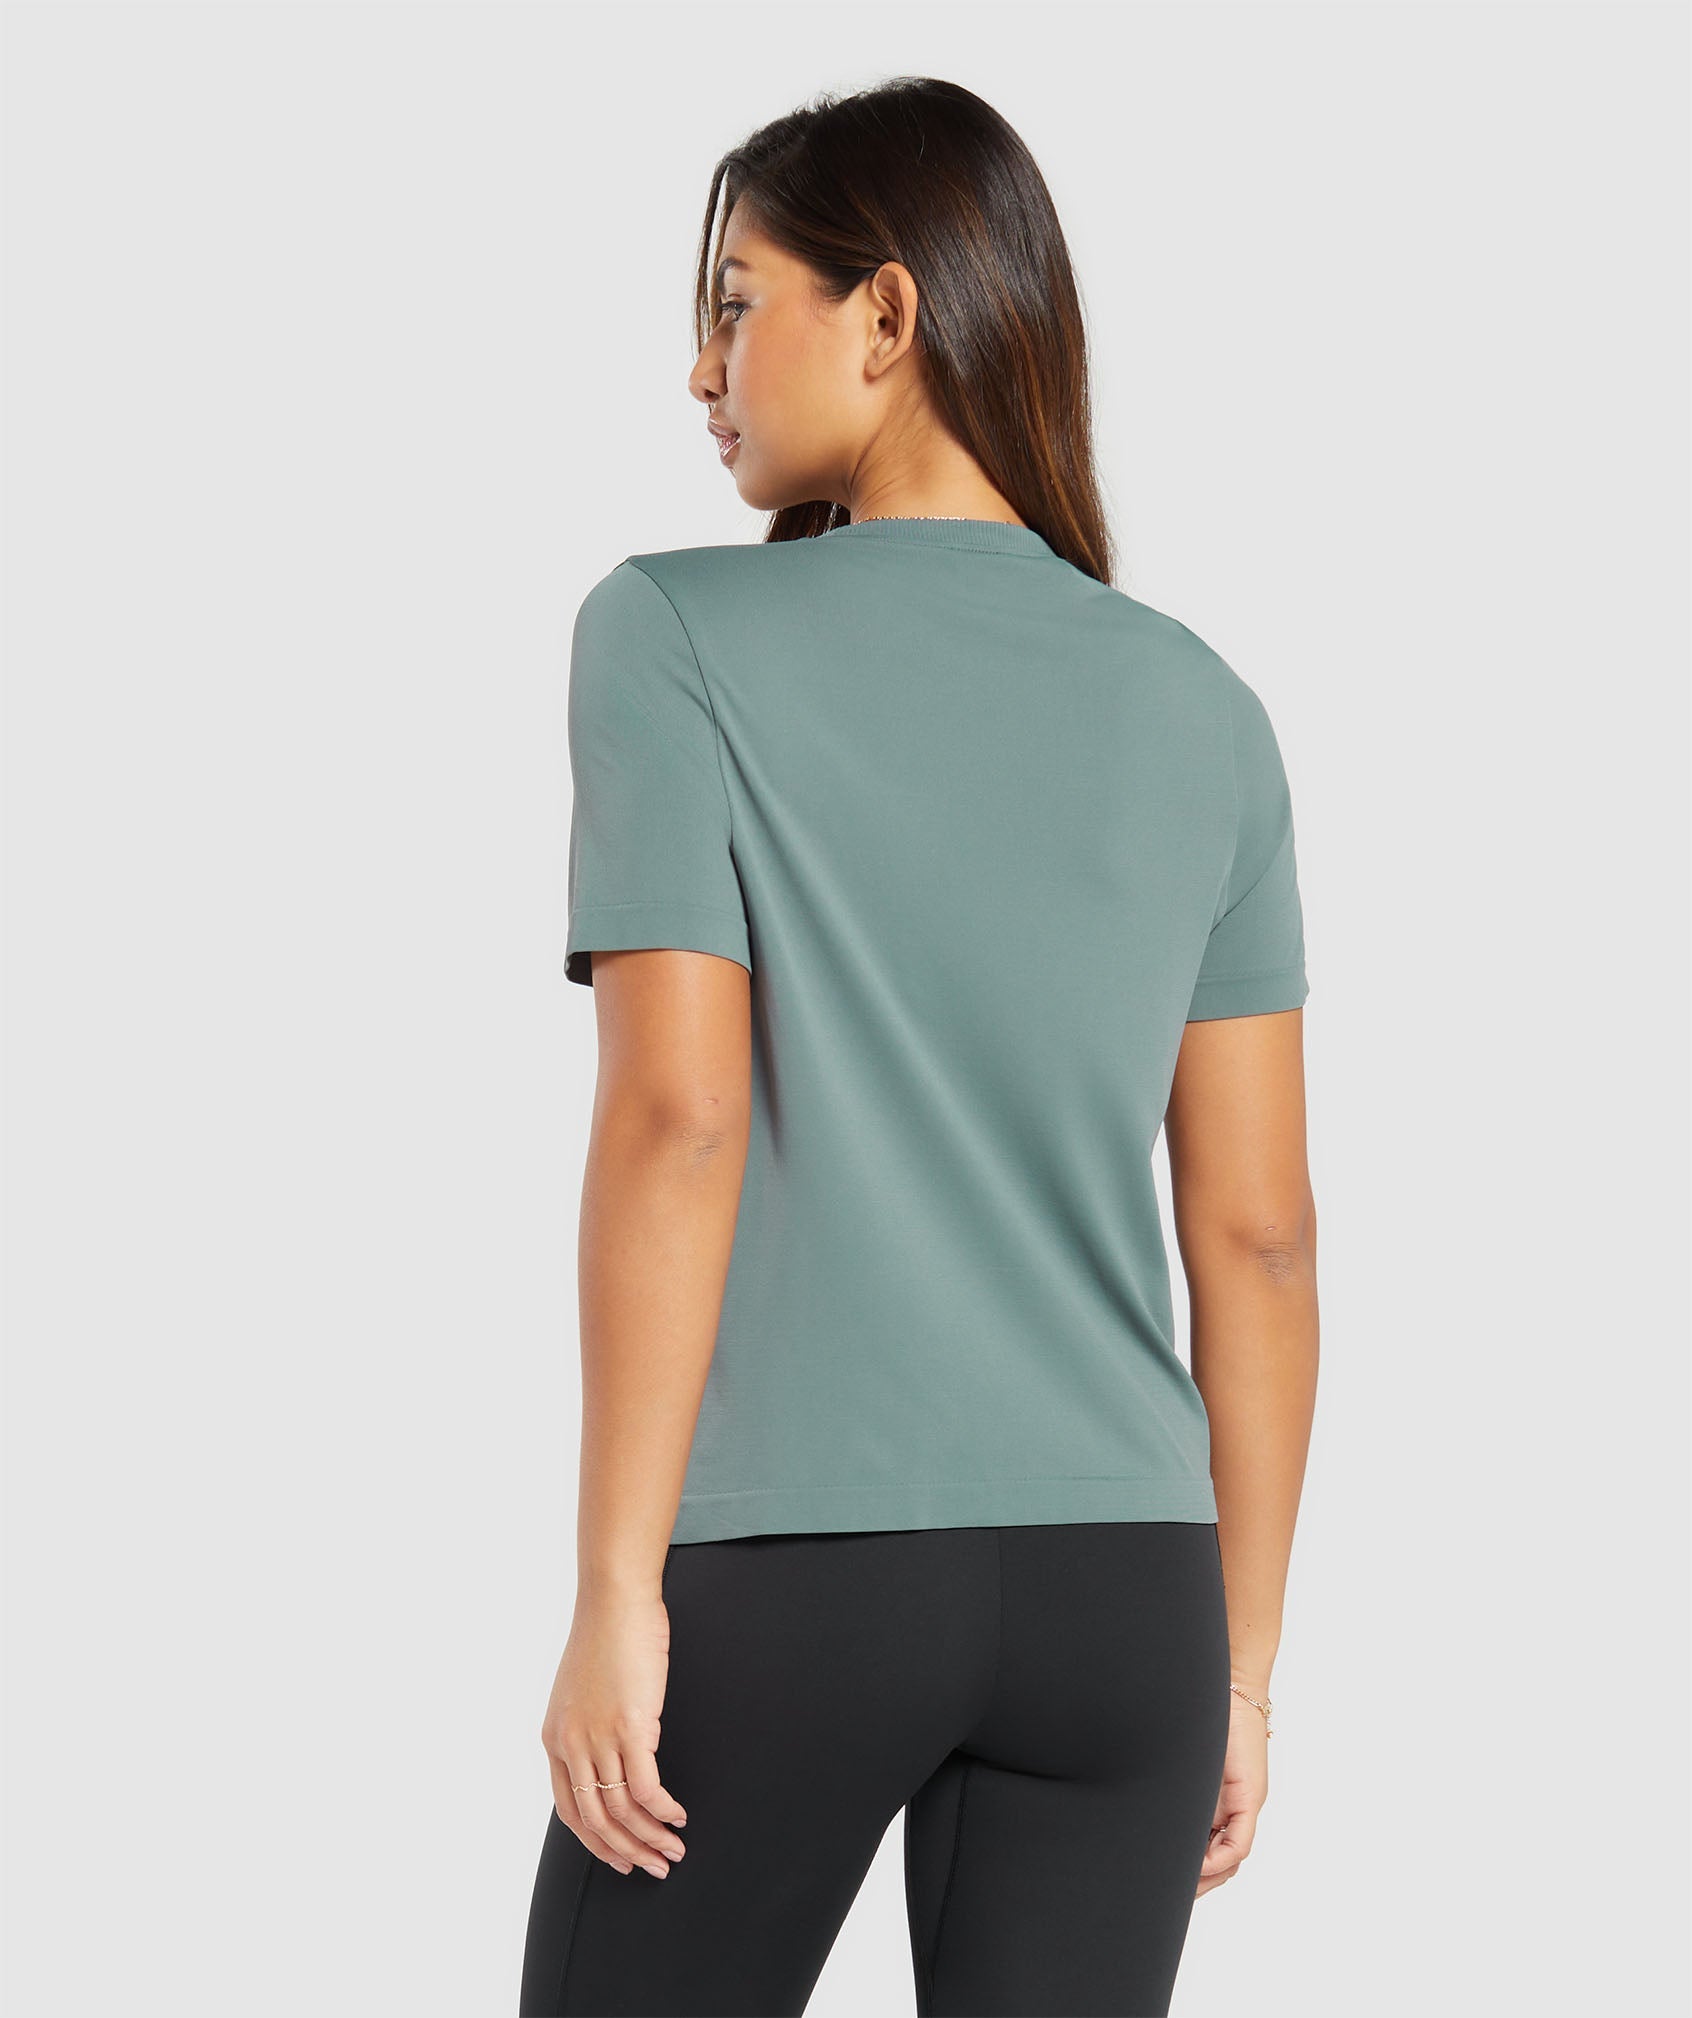 Everyday Seamless T-Shirt in Cargo Teal - view 2